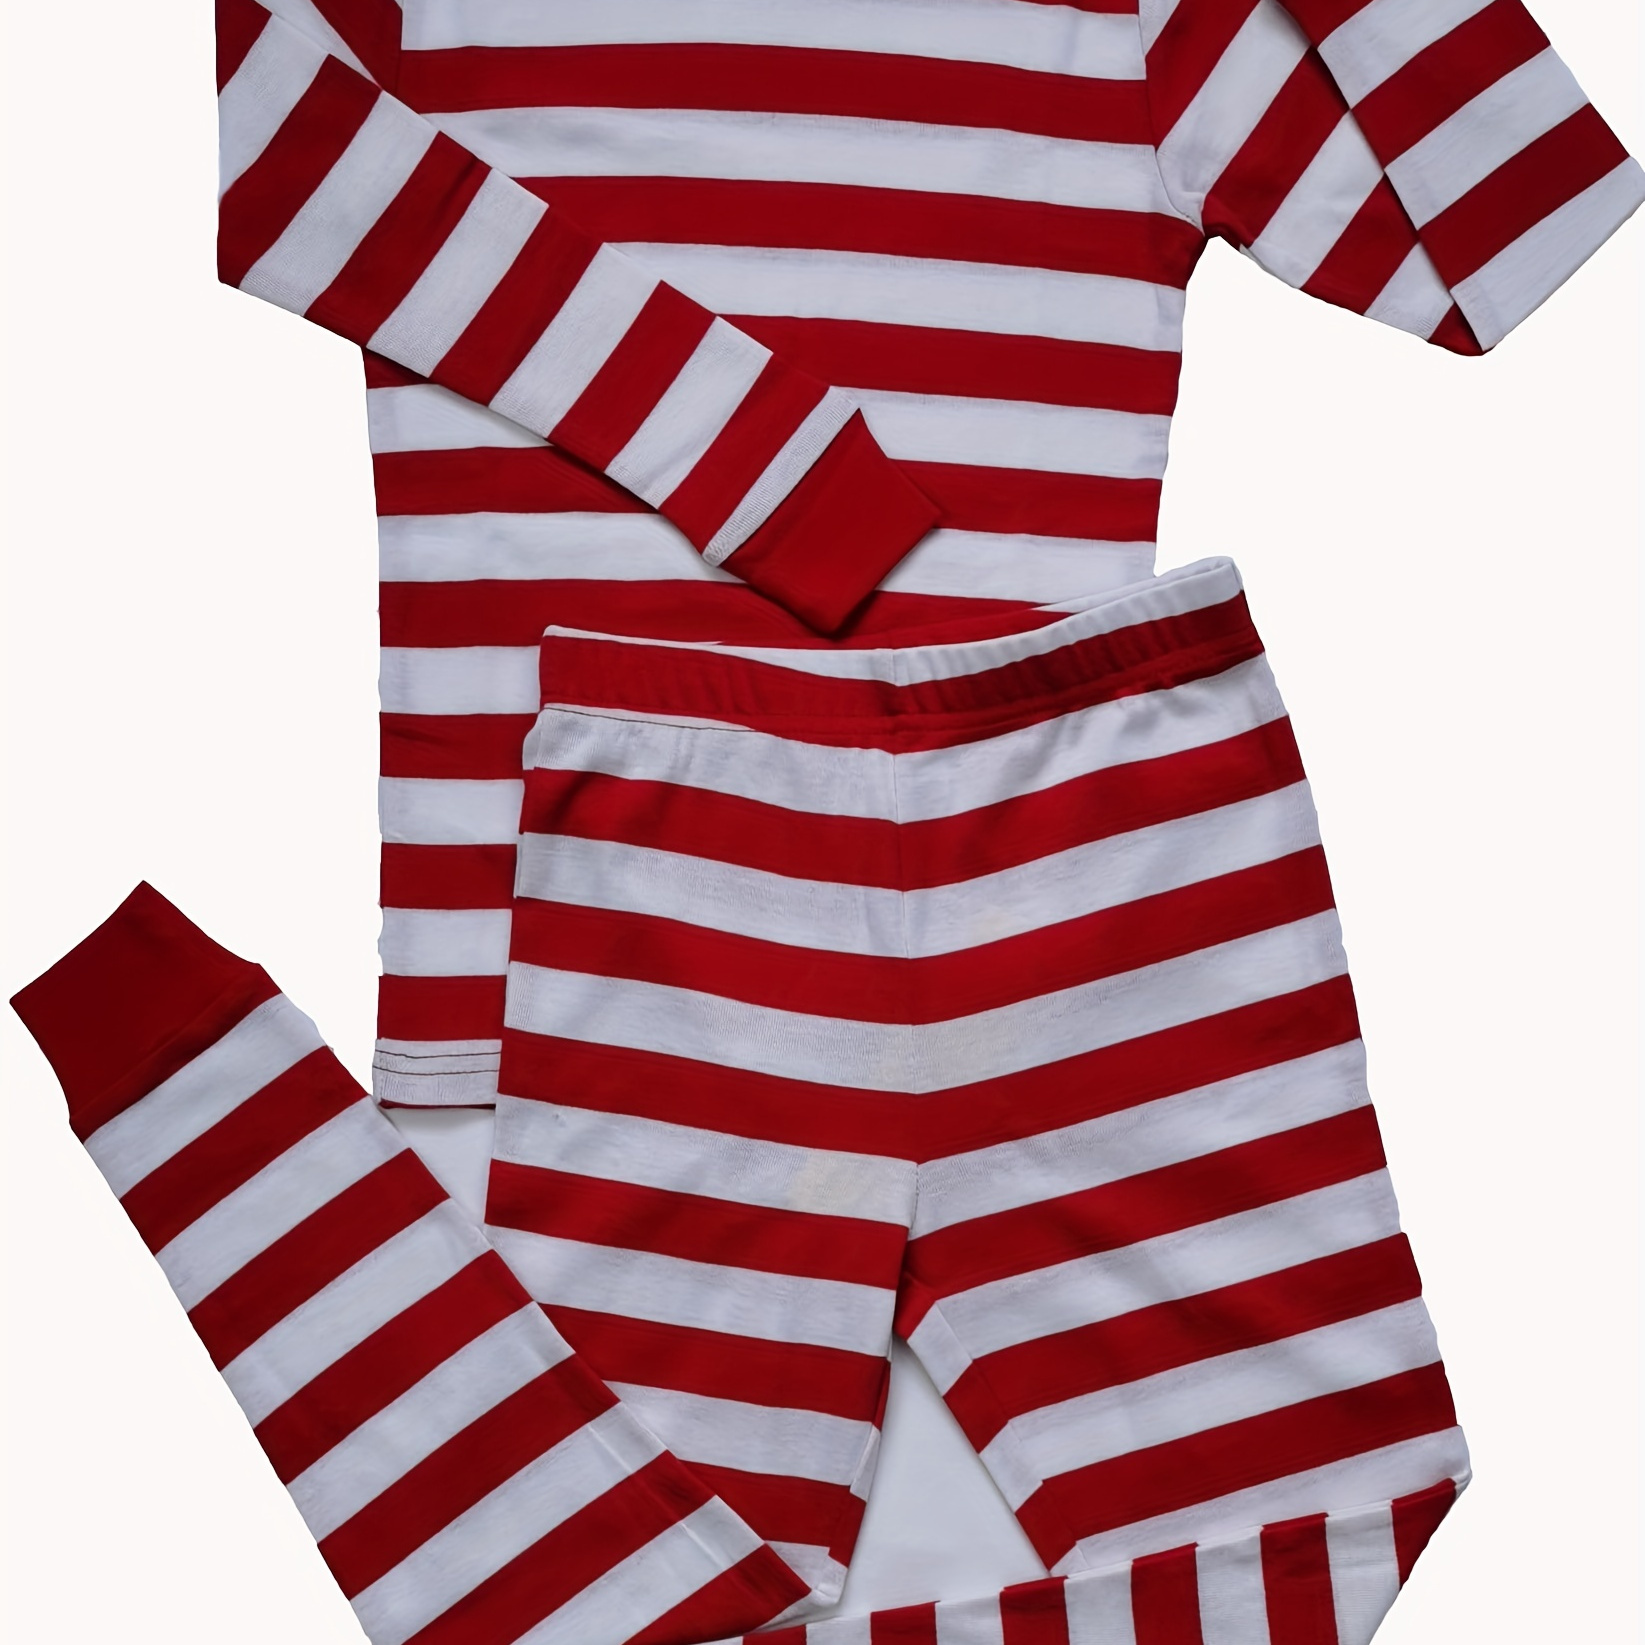 

Children's Home Wear Round Neck Long-sleeved Top With Elastic Waist Long Pants Red And White Woven Stripe Pajamas Set